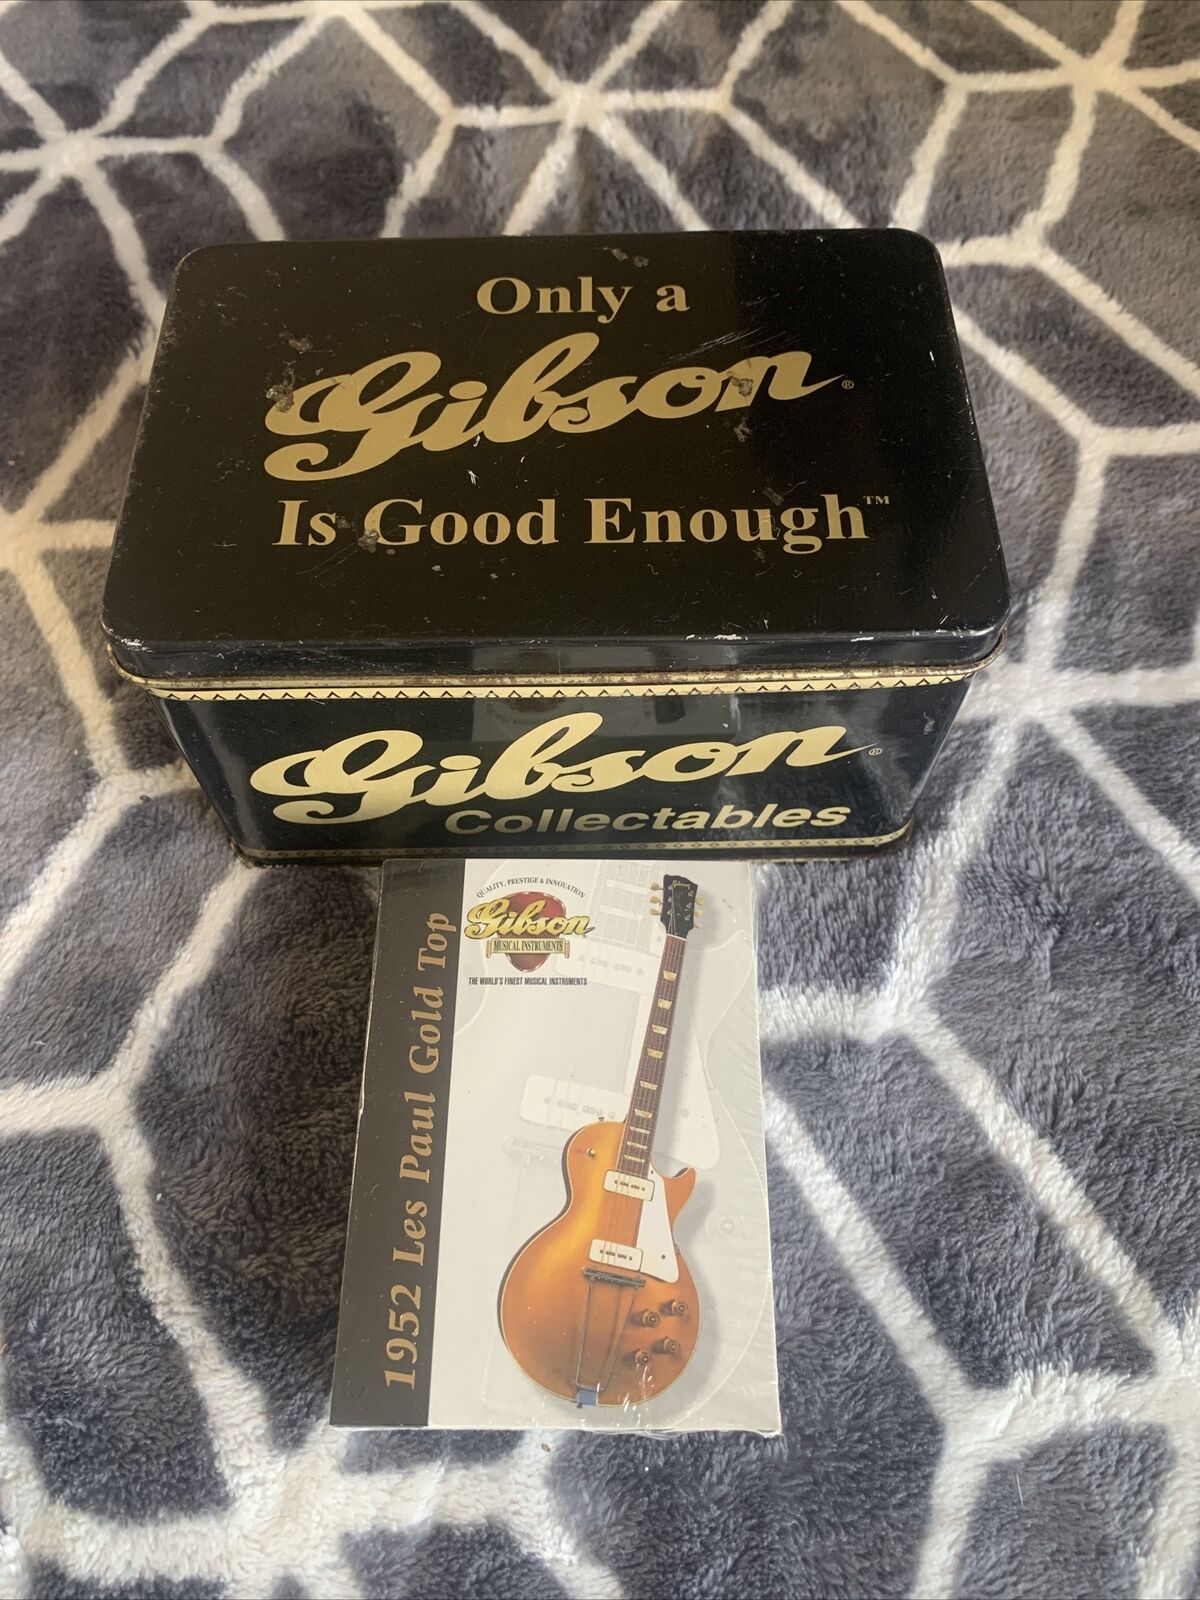 VTG 1999 Gibson Guitar Collectors Trading Cards Full Set with Tin